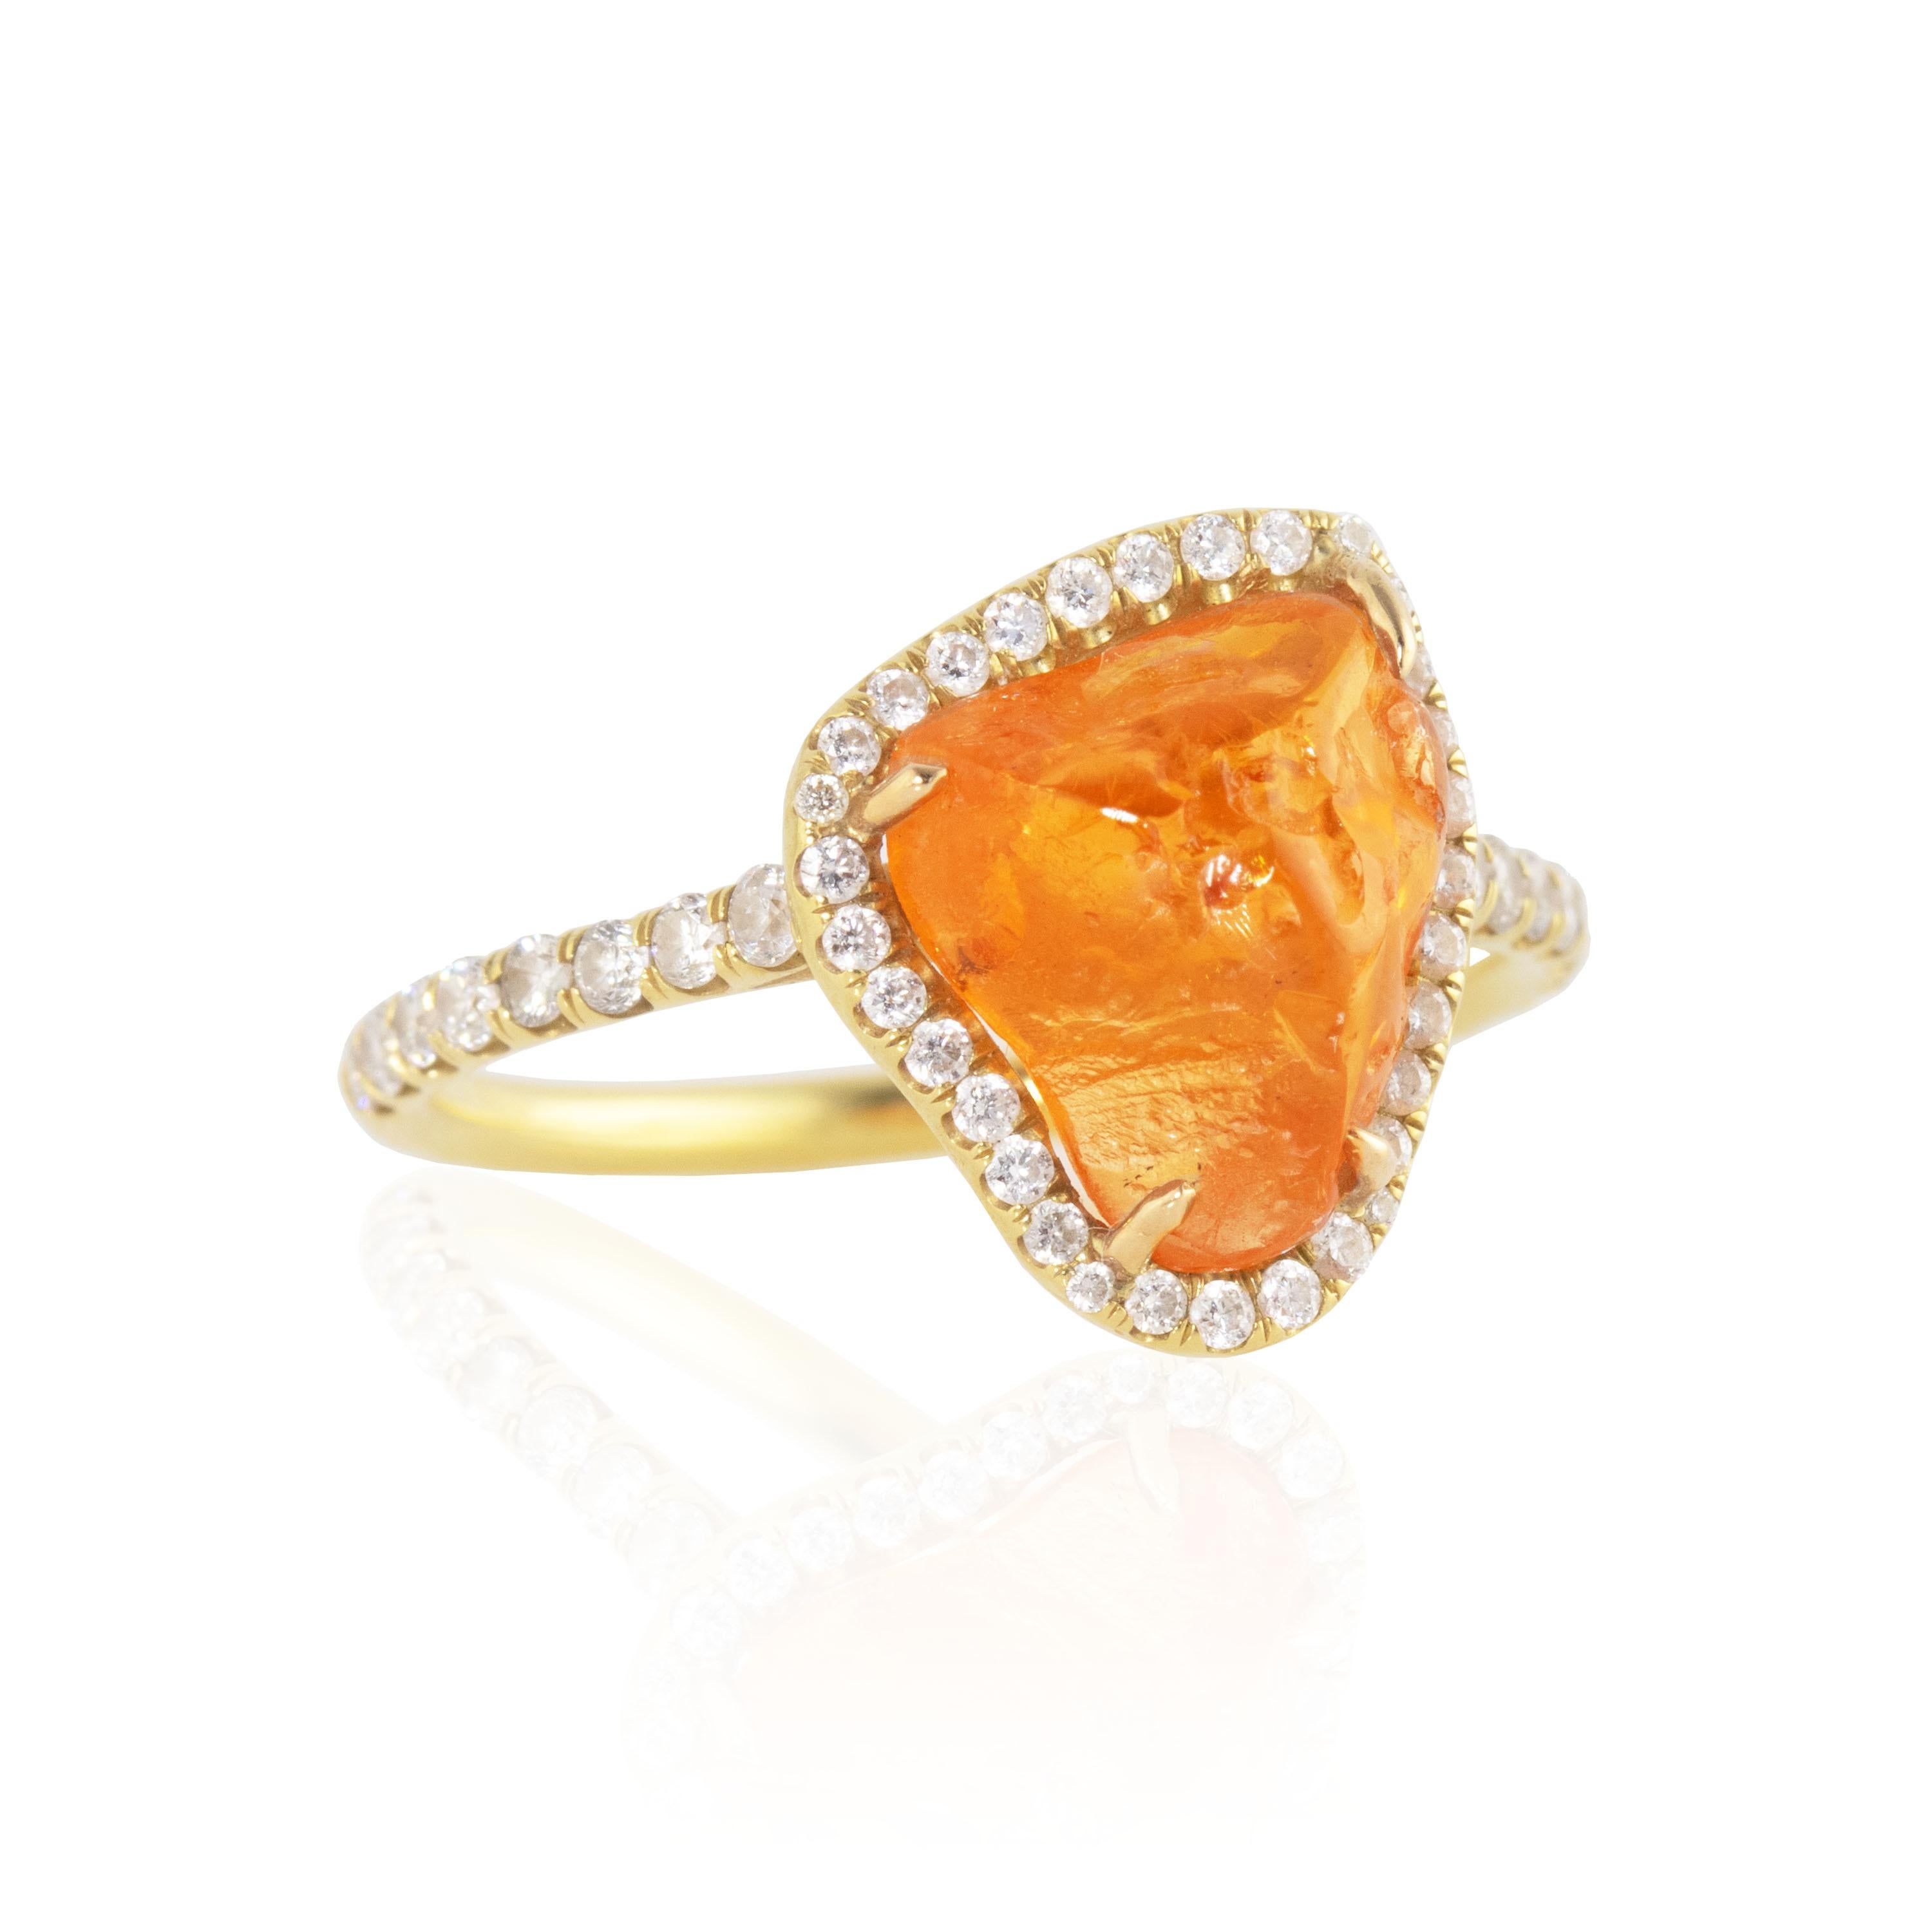 Featuring a large orange, rough cut Fanta Orange Spessartite Garnet center stone and surrounded by diamonds, this ring was inspired by the reflections of the sun on ocean waves.  Featuring a 9.96 carat bright orange rough Spessartite Garnet